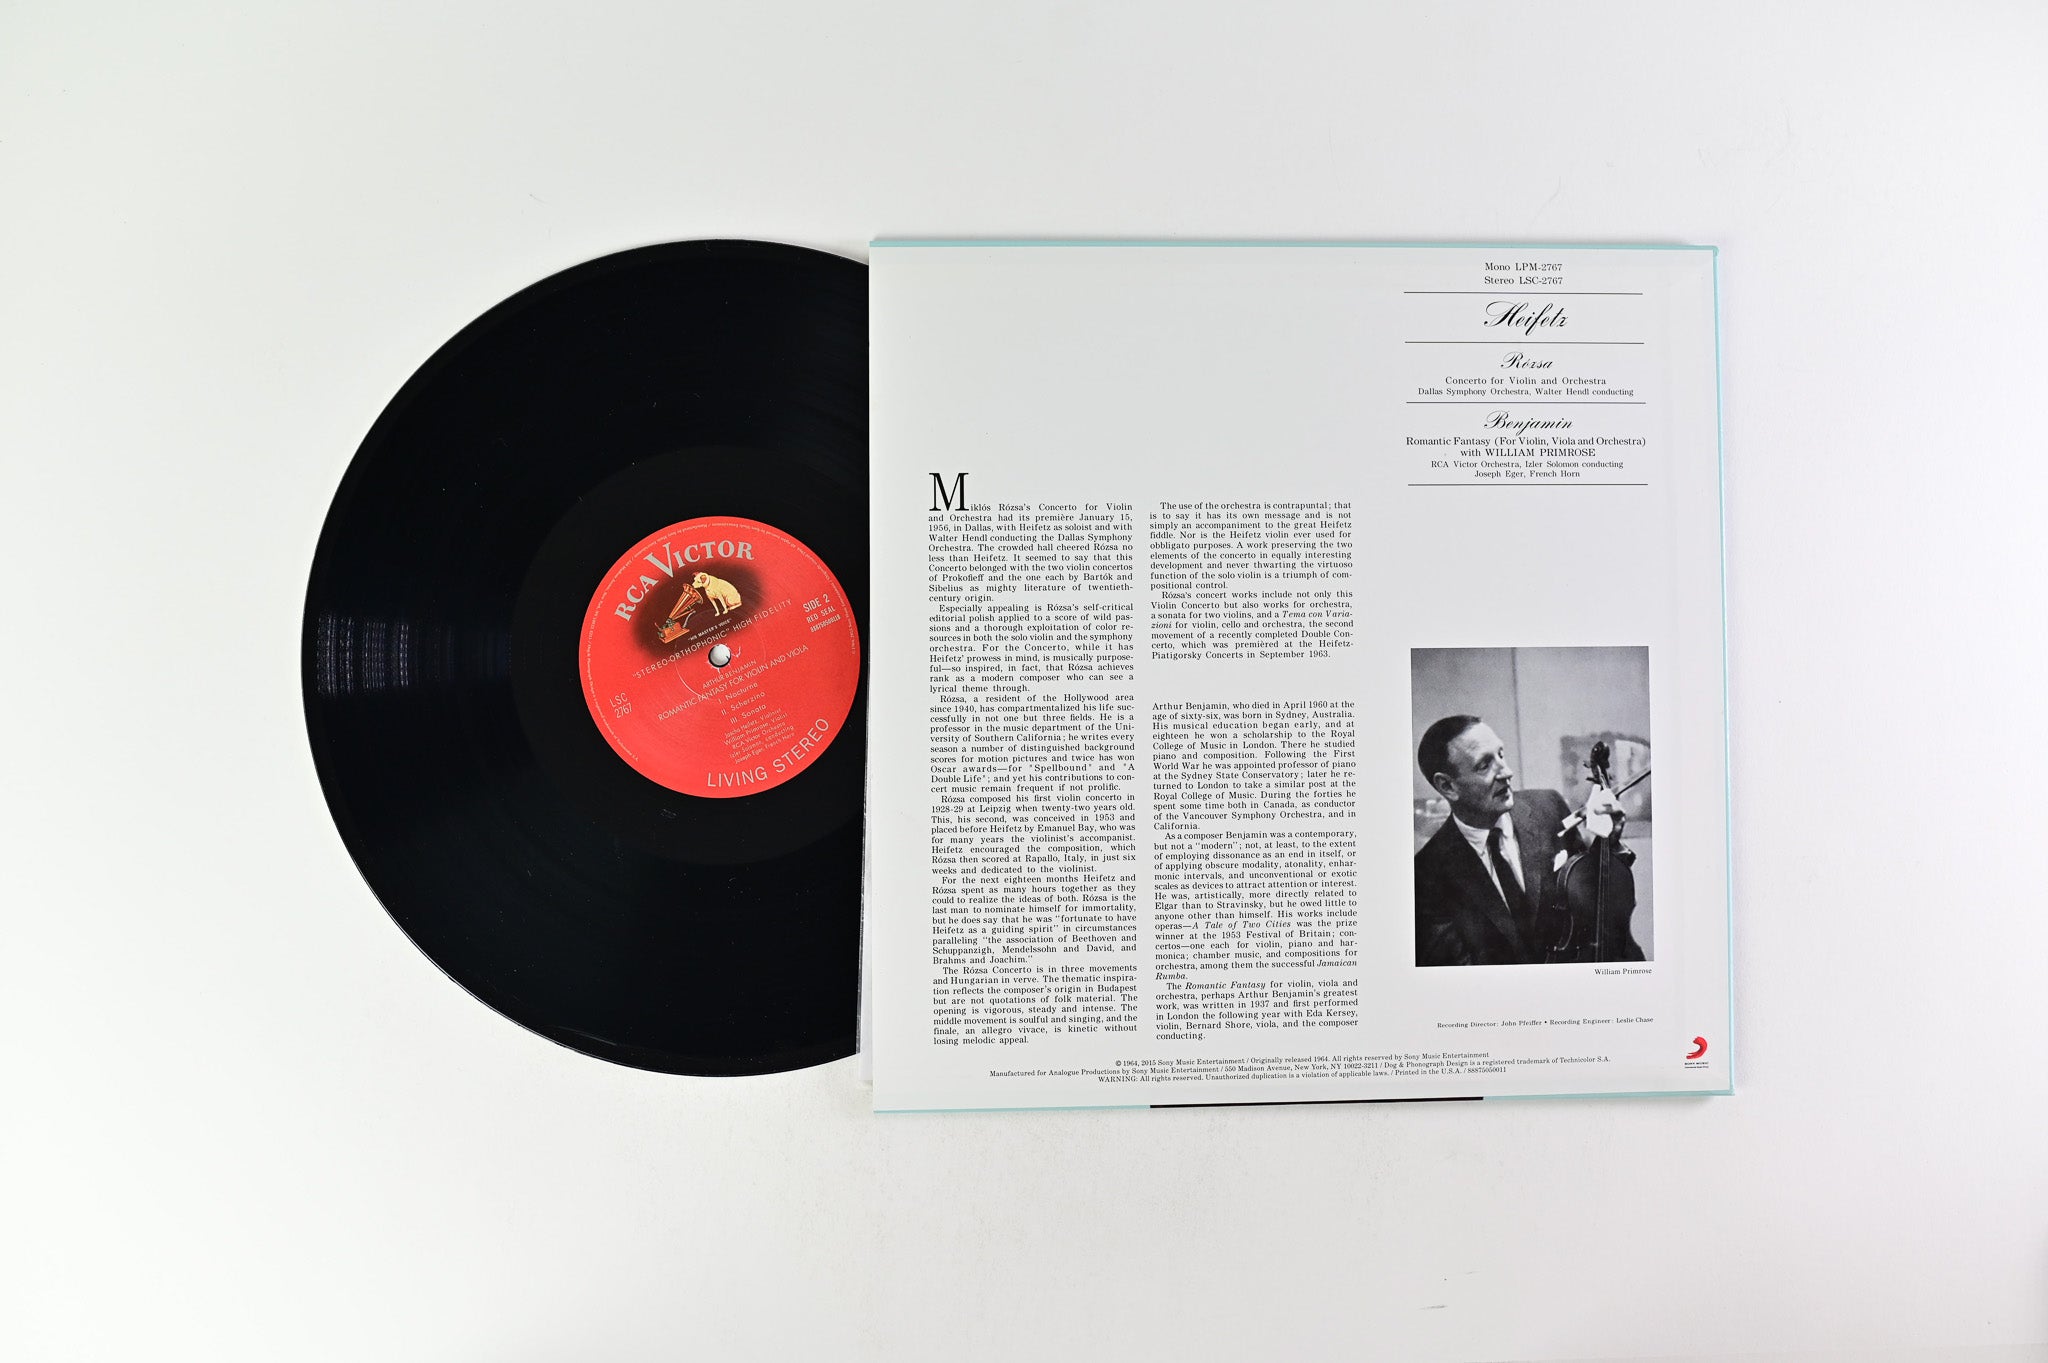 Jascha Heifetz - Concerto For Violin And Orchestra / Romantic Fantasy Reissue on Analogue Productions